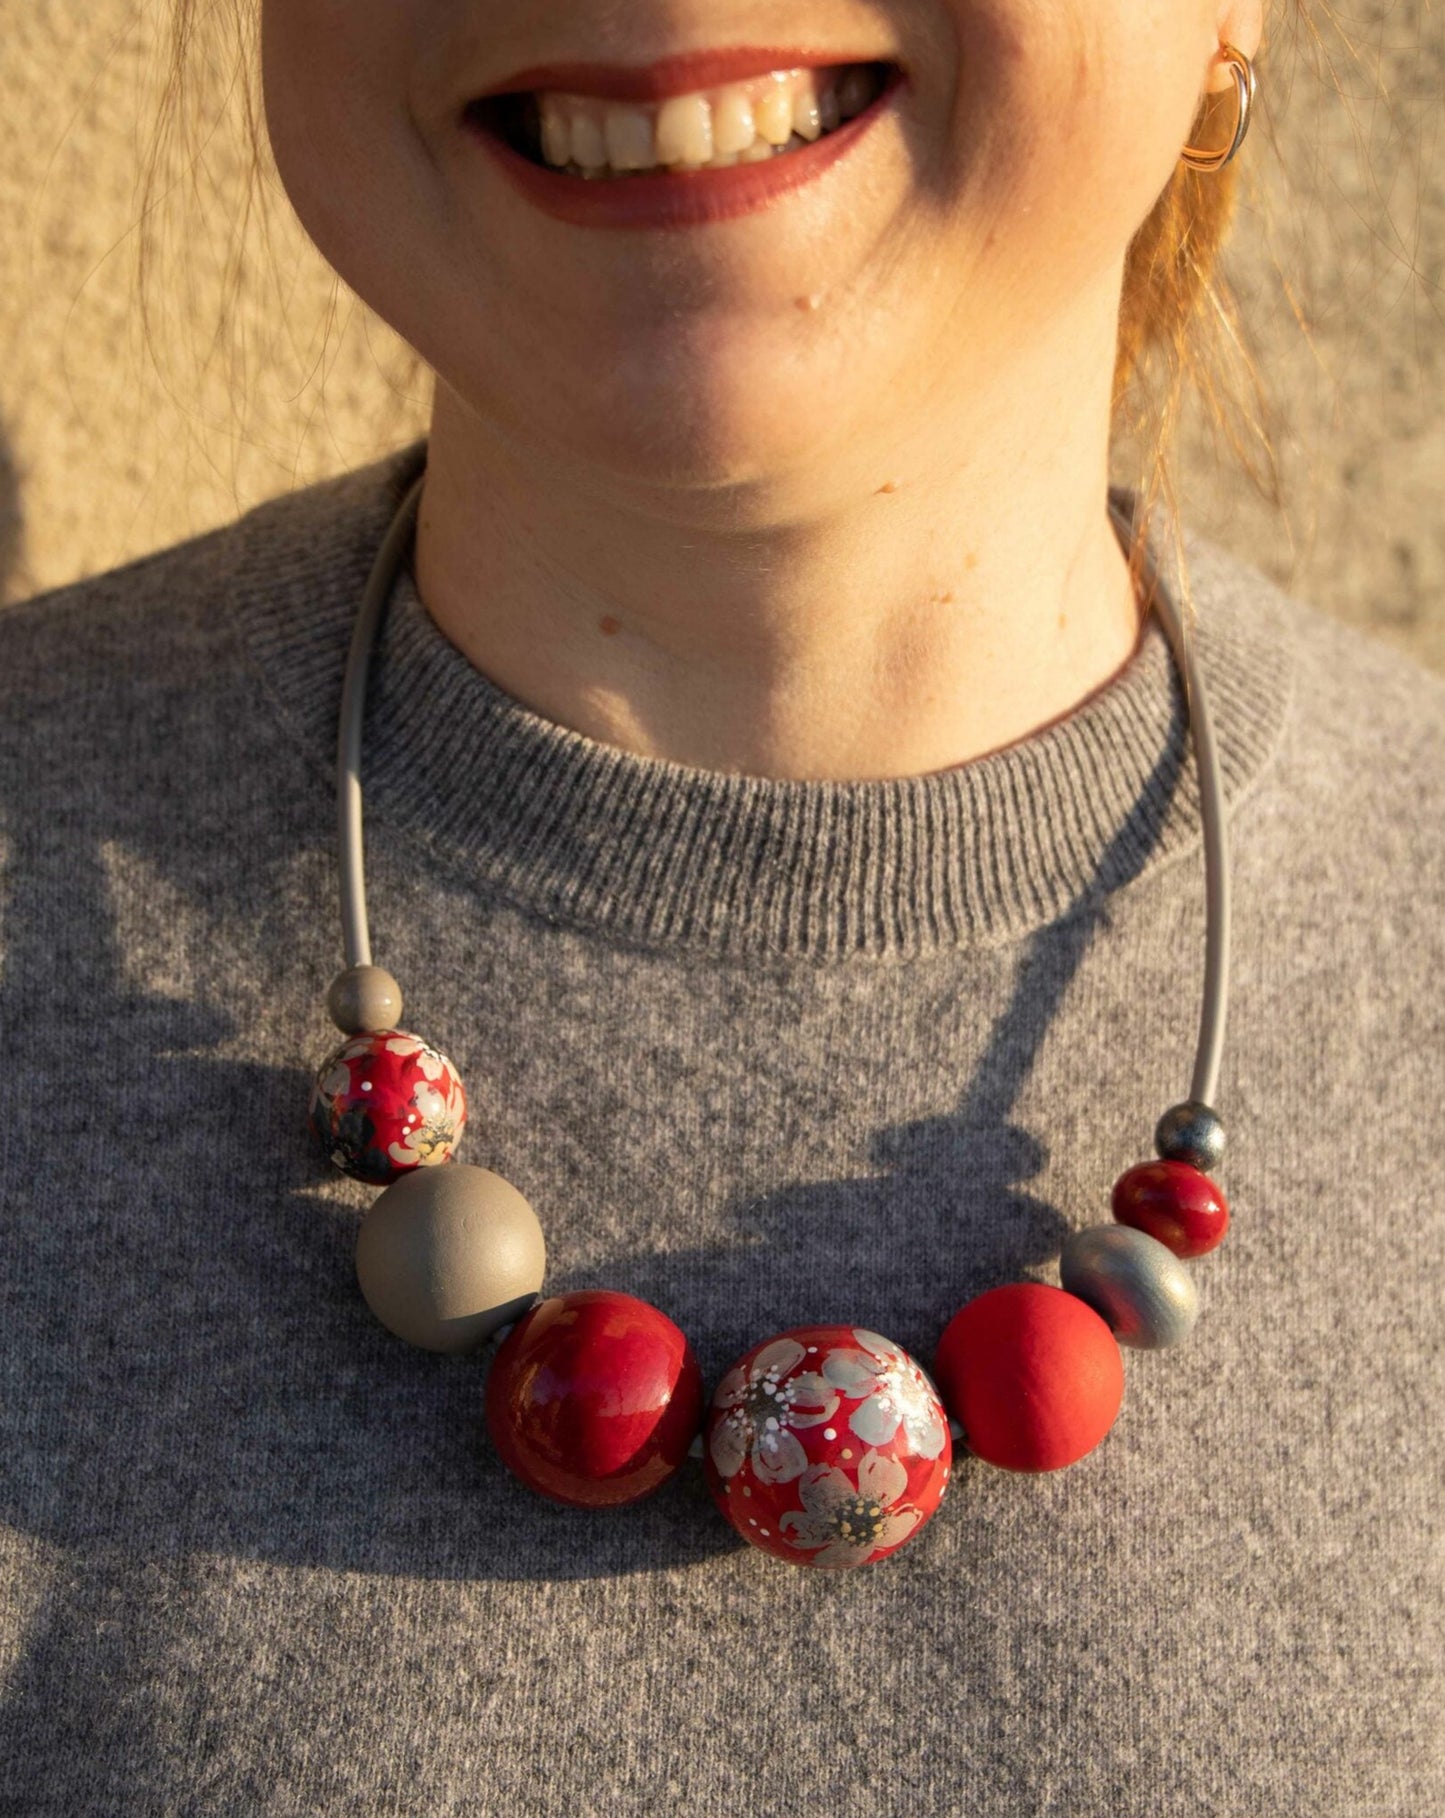 BUY Chunky Wood Bead Necklace ON SALE NOW! - Wooden Earth